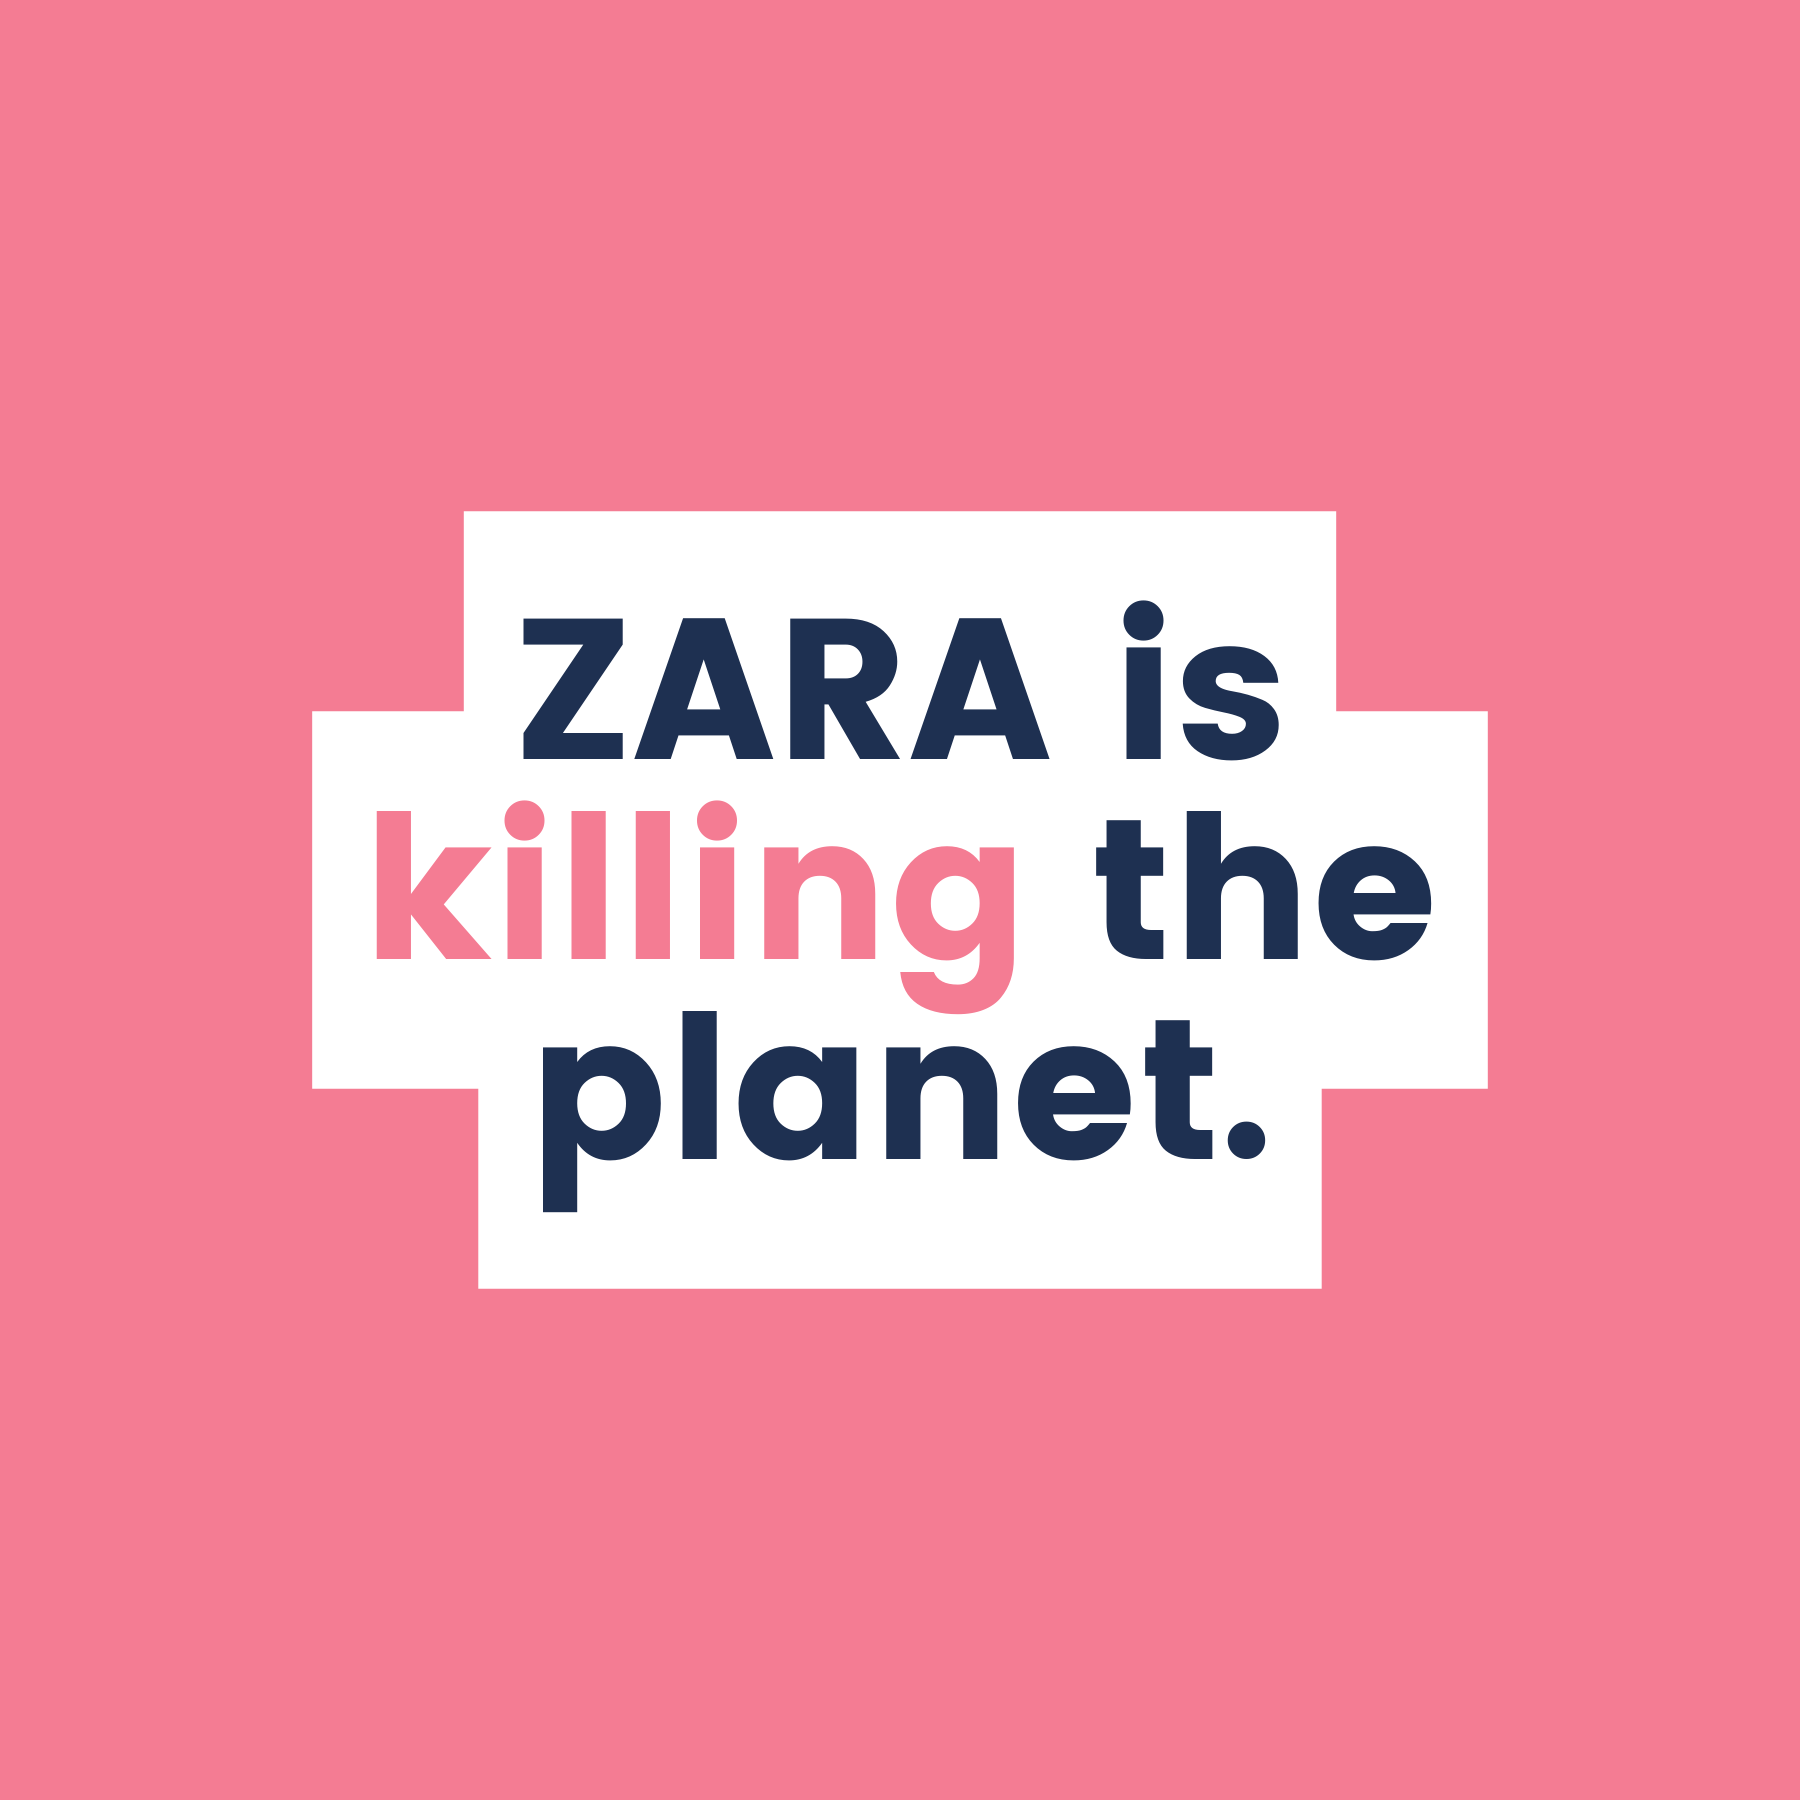 ZARA sources its cotton from multiple suppliers in Asia who source their cotton from farms in the Cerrado. This is why knowing your supply chain and material sources is important.